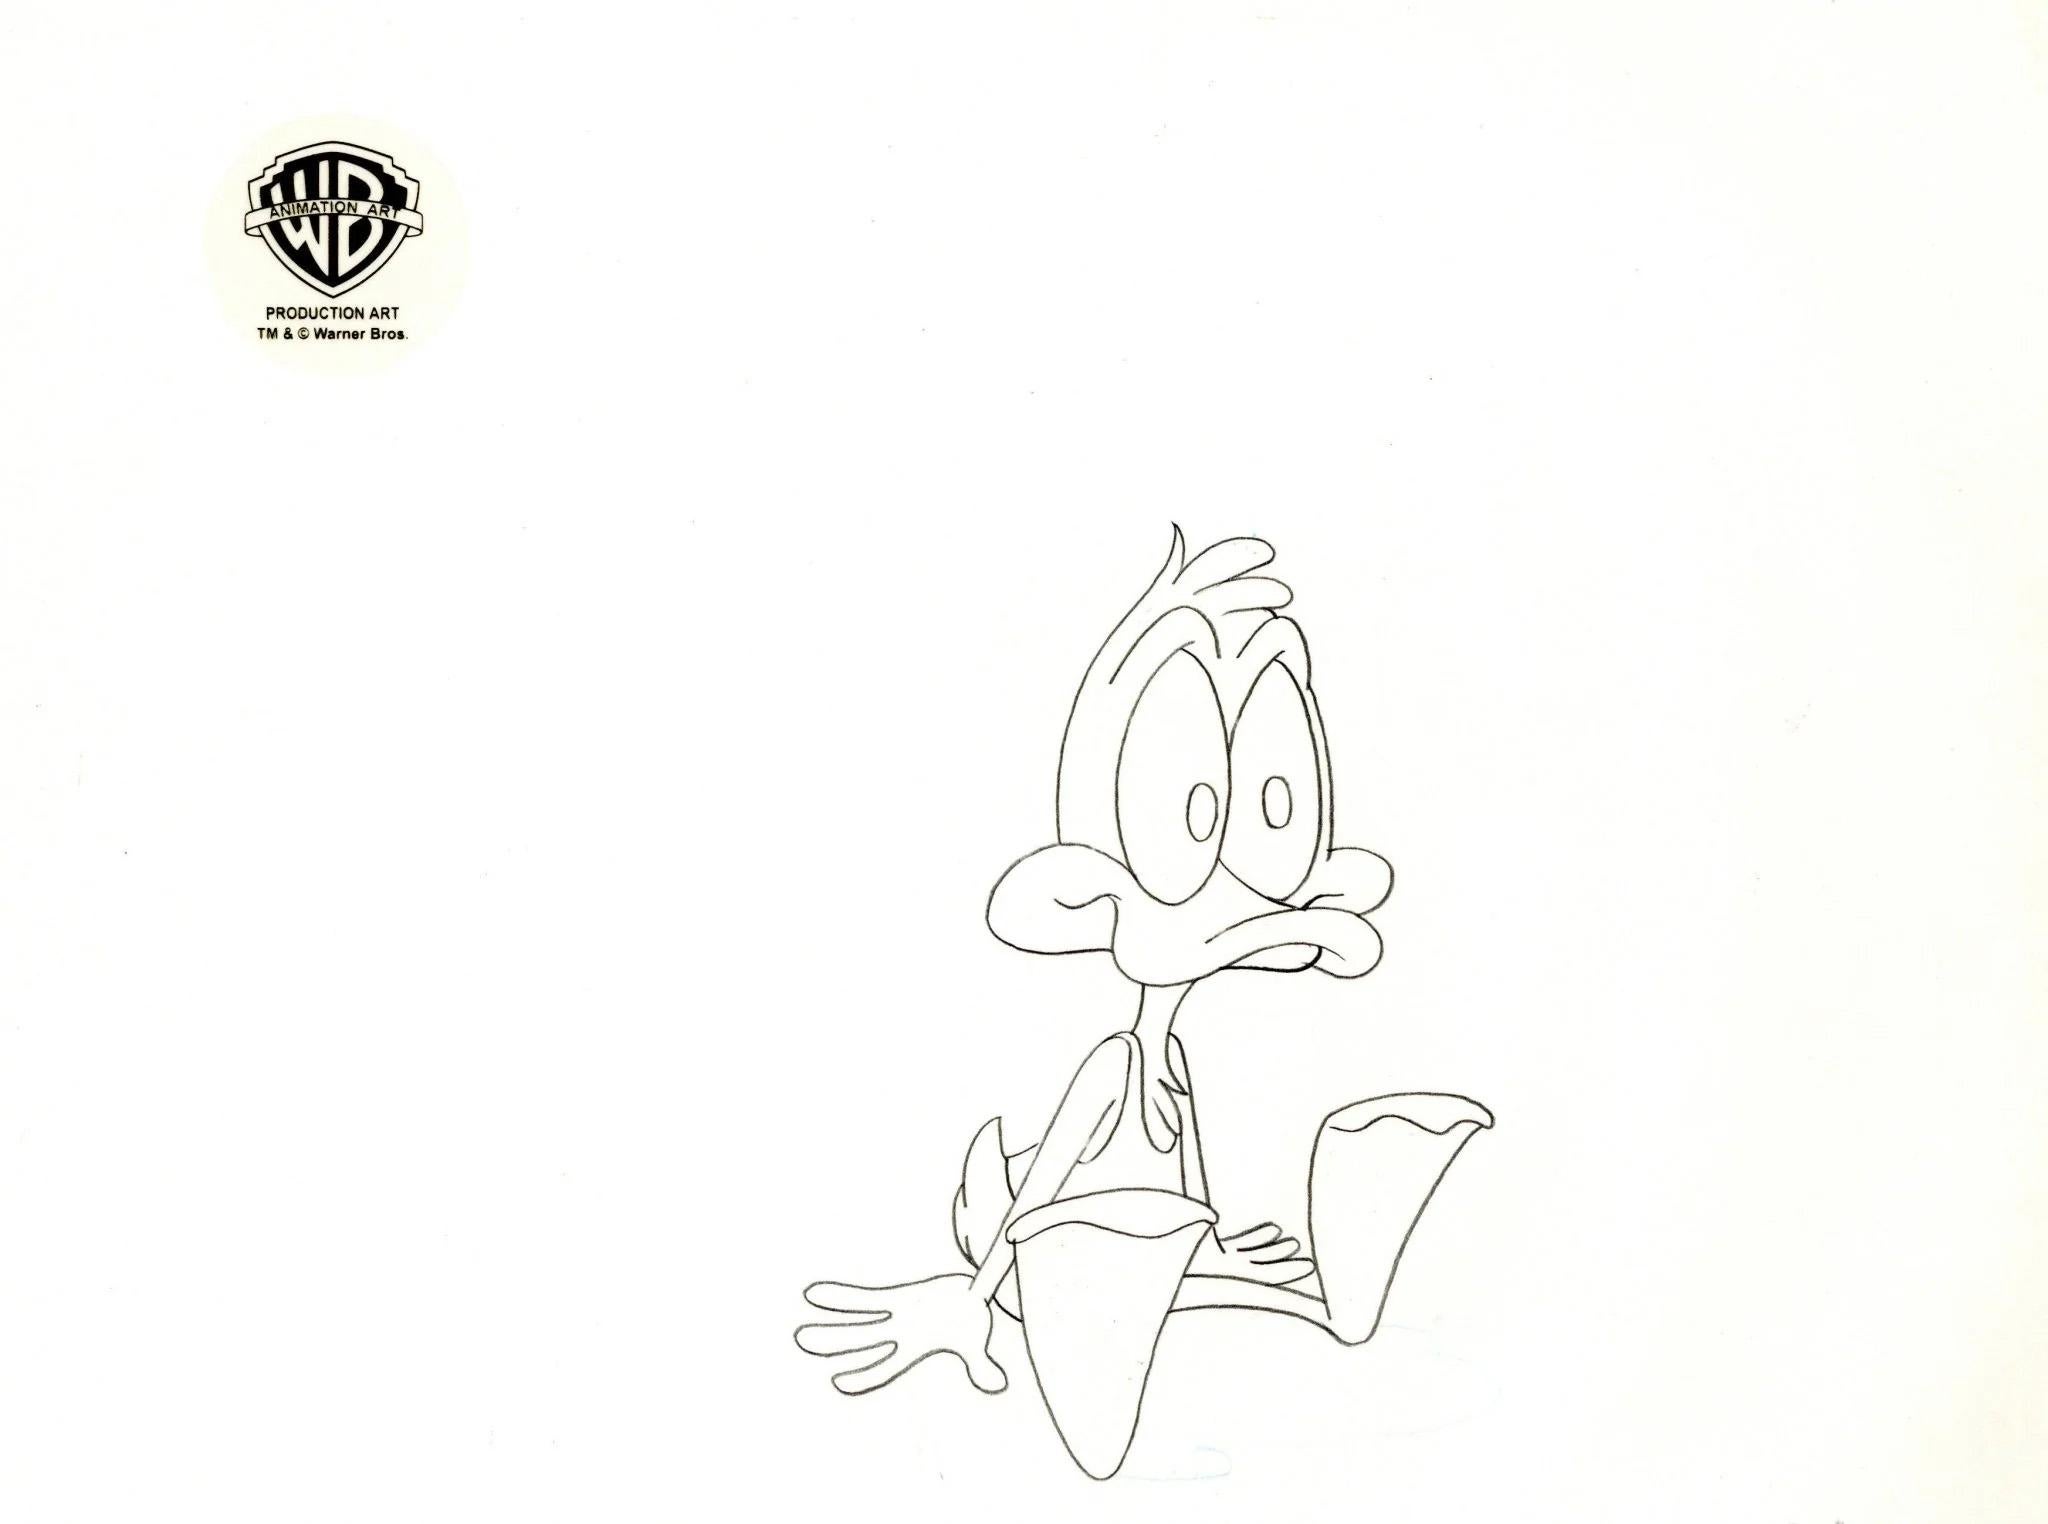 Tiny Toons Original Production Drawing: Plucky Duck - Art by Warner Bros. Studio Artists